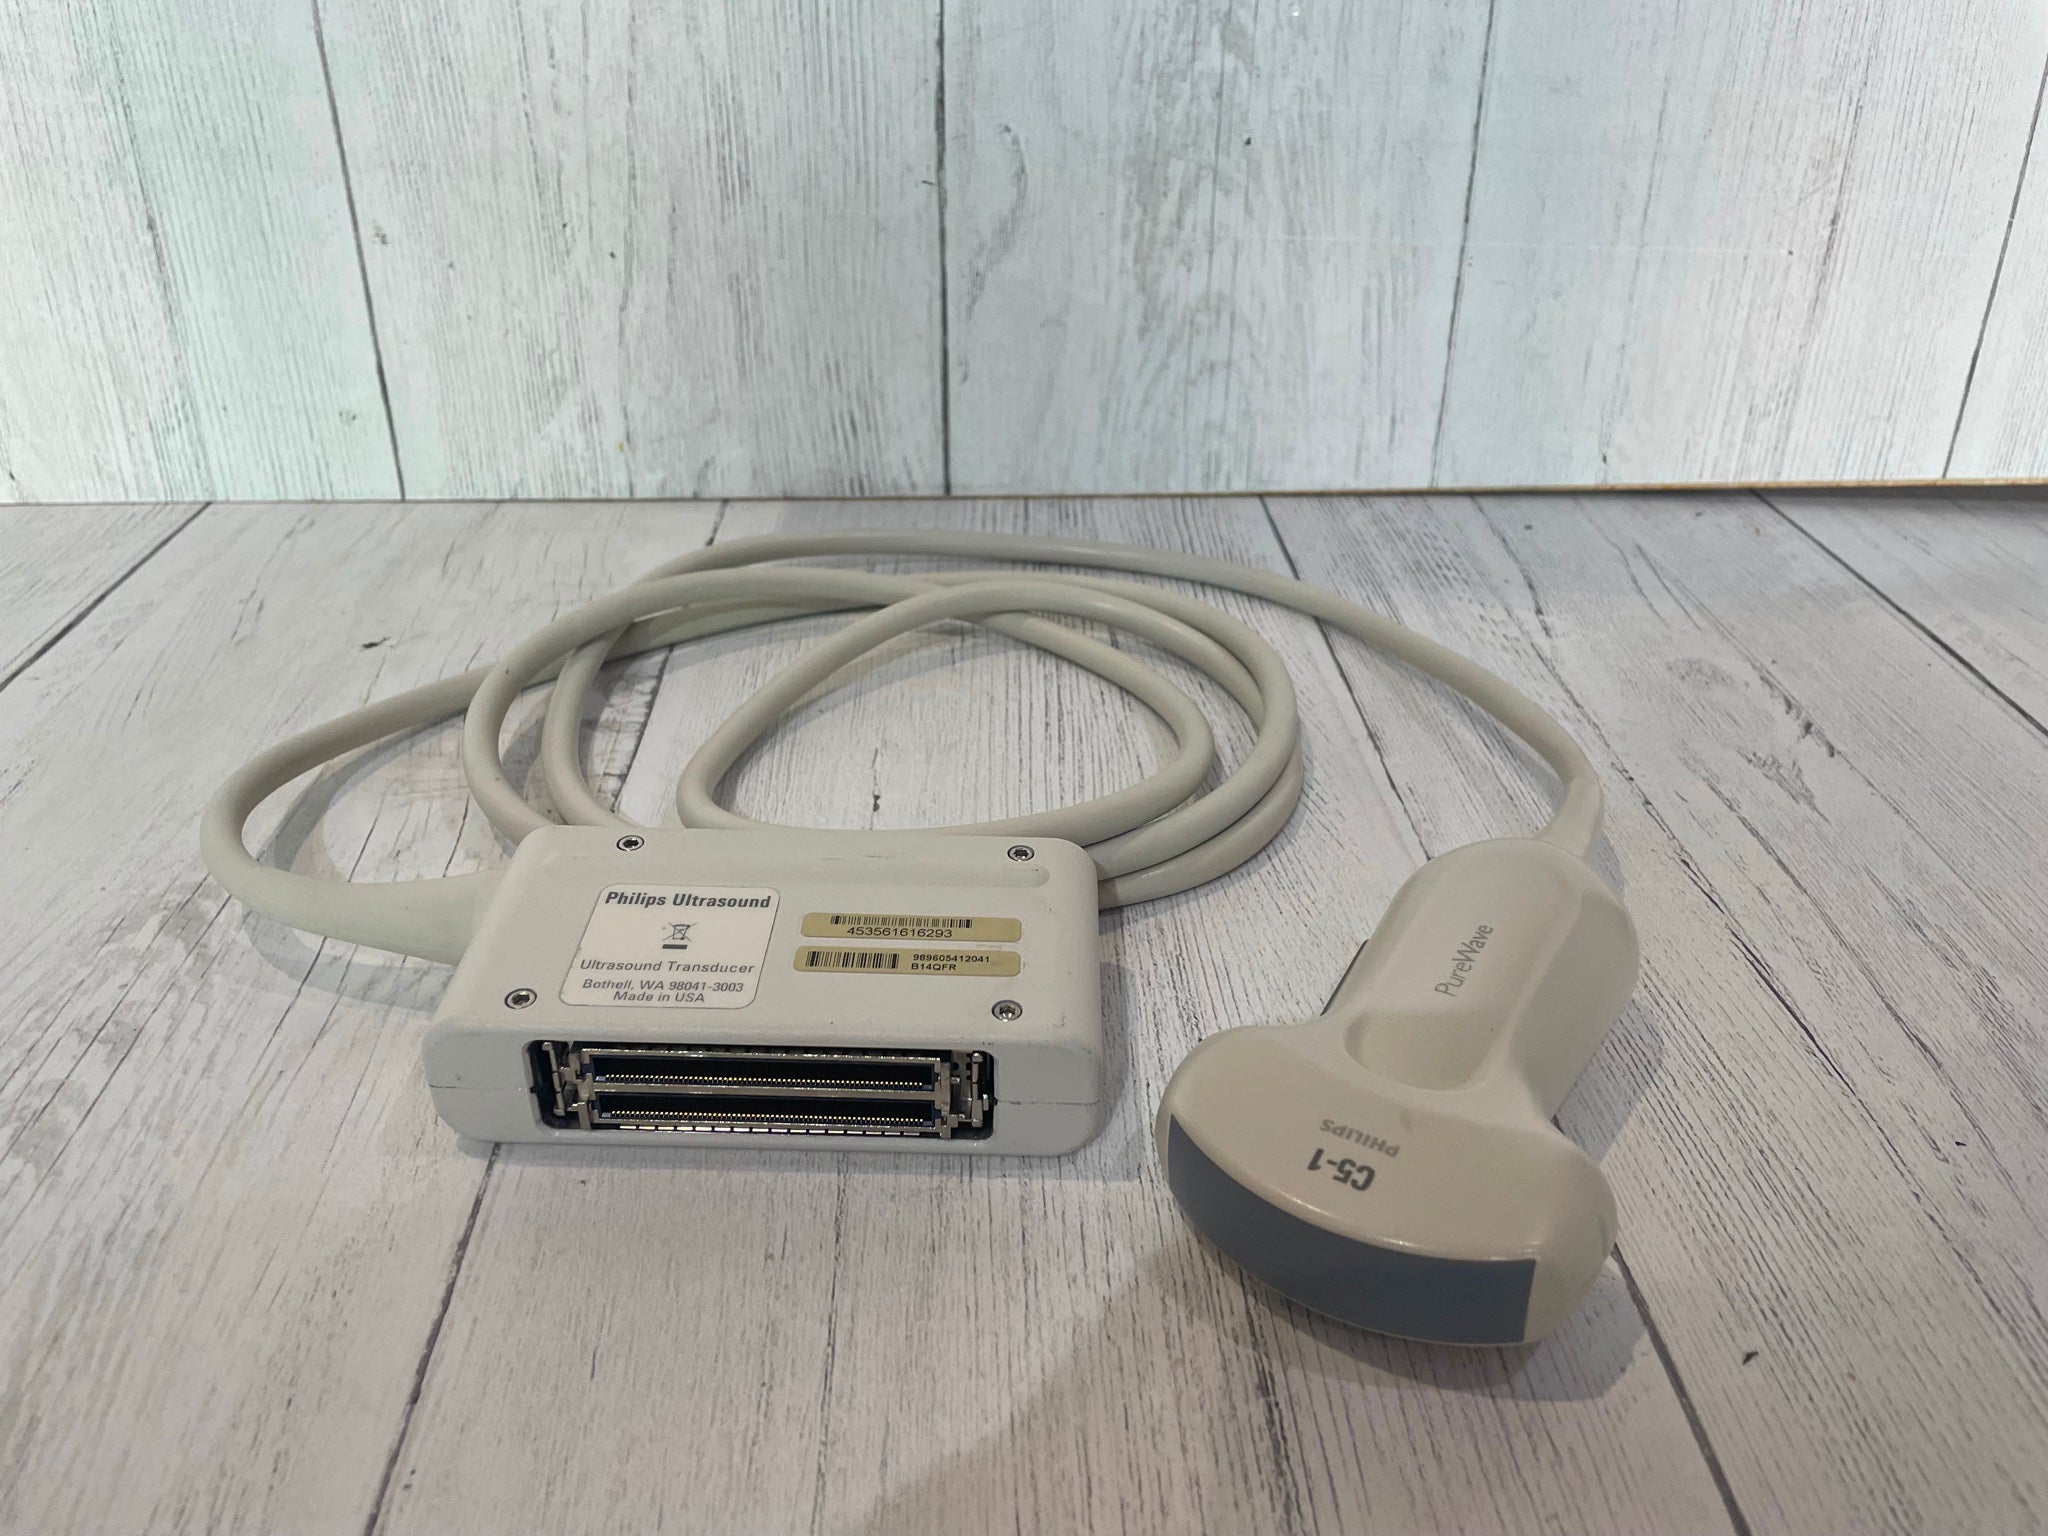 Philips C5-1 Ultrasound Probe DIAGNOSTIC ULTRASOUND MACHINES FOR SALE